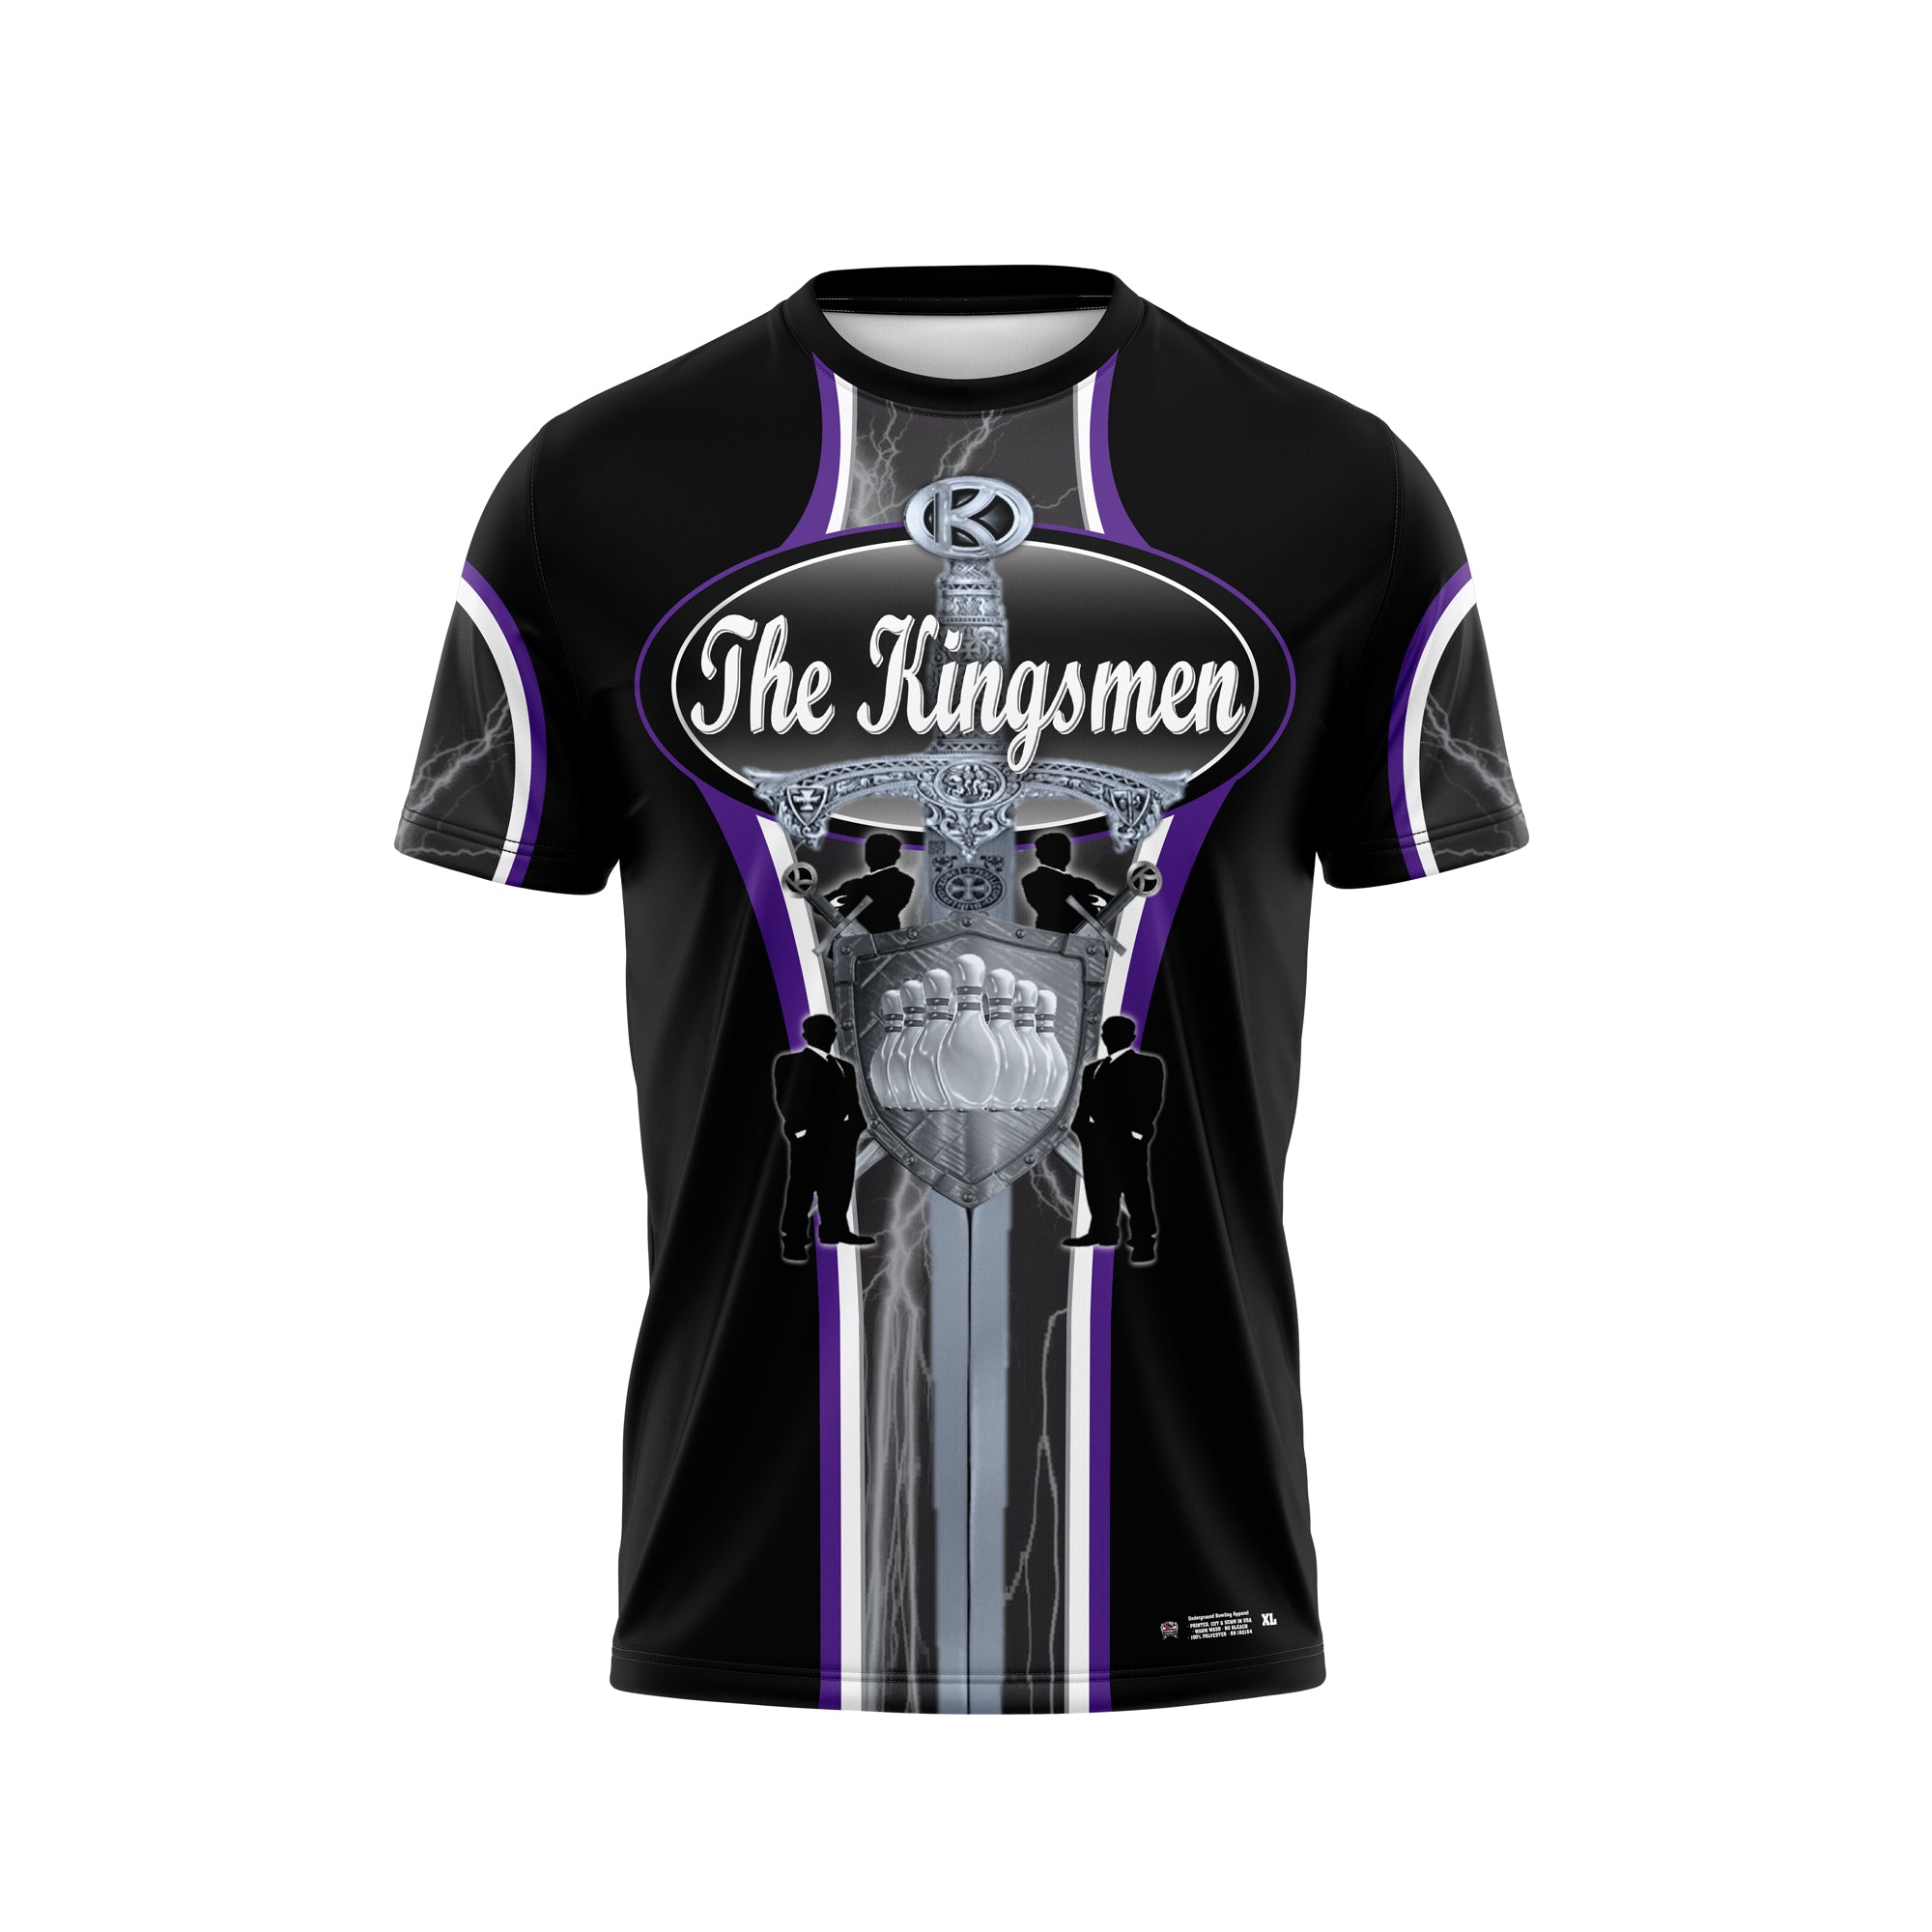 The Kingsmen Home Jersey